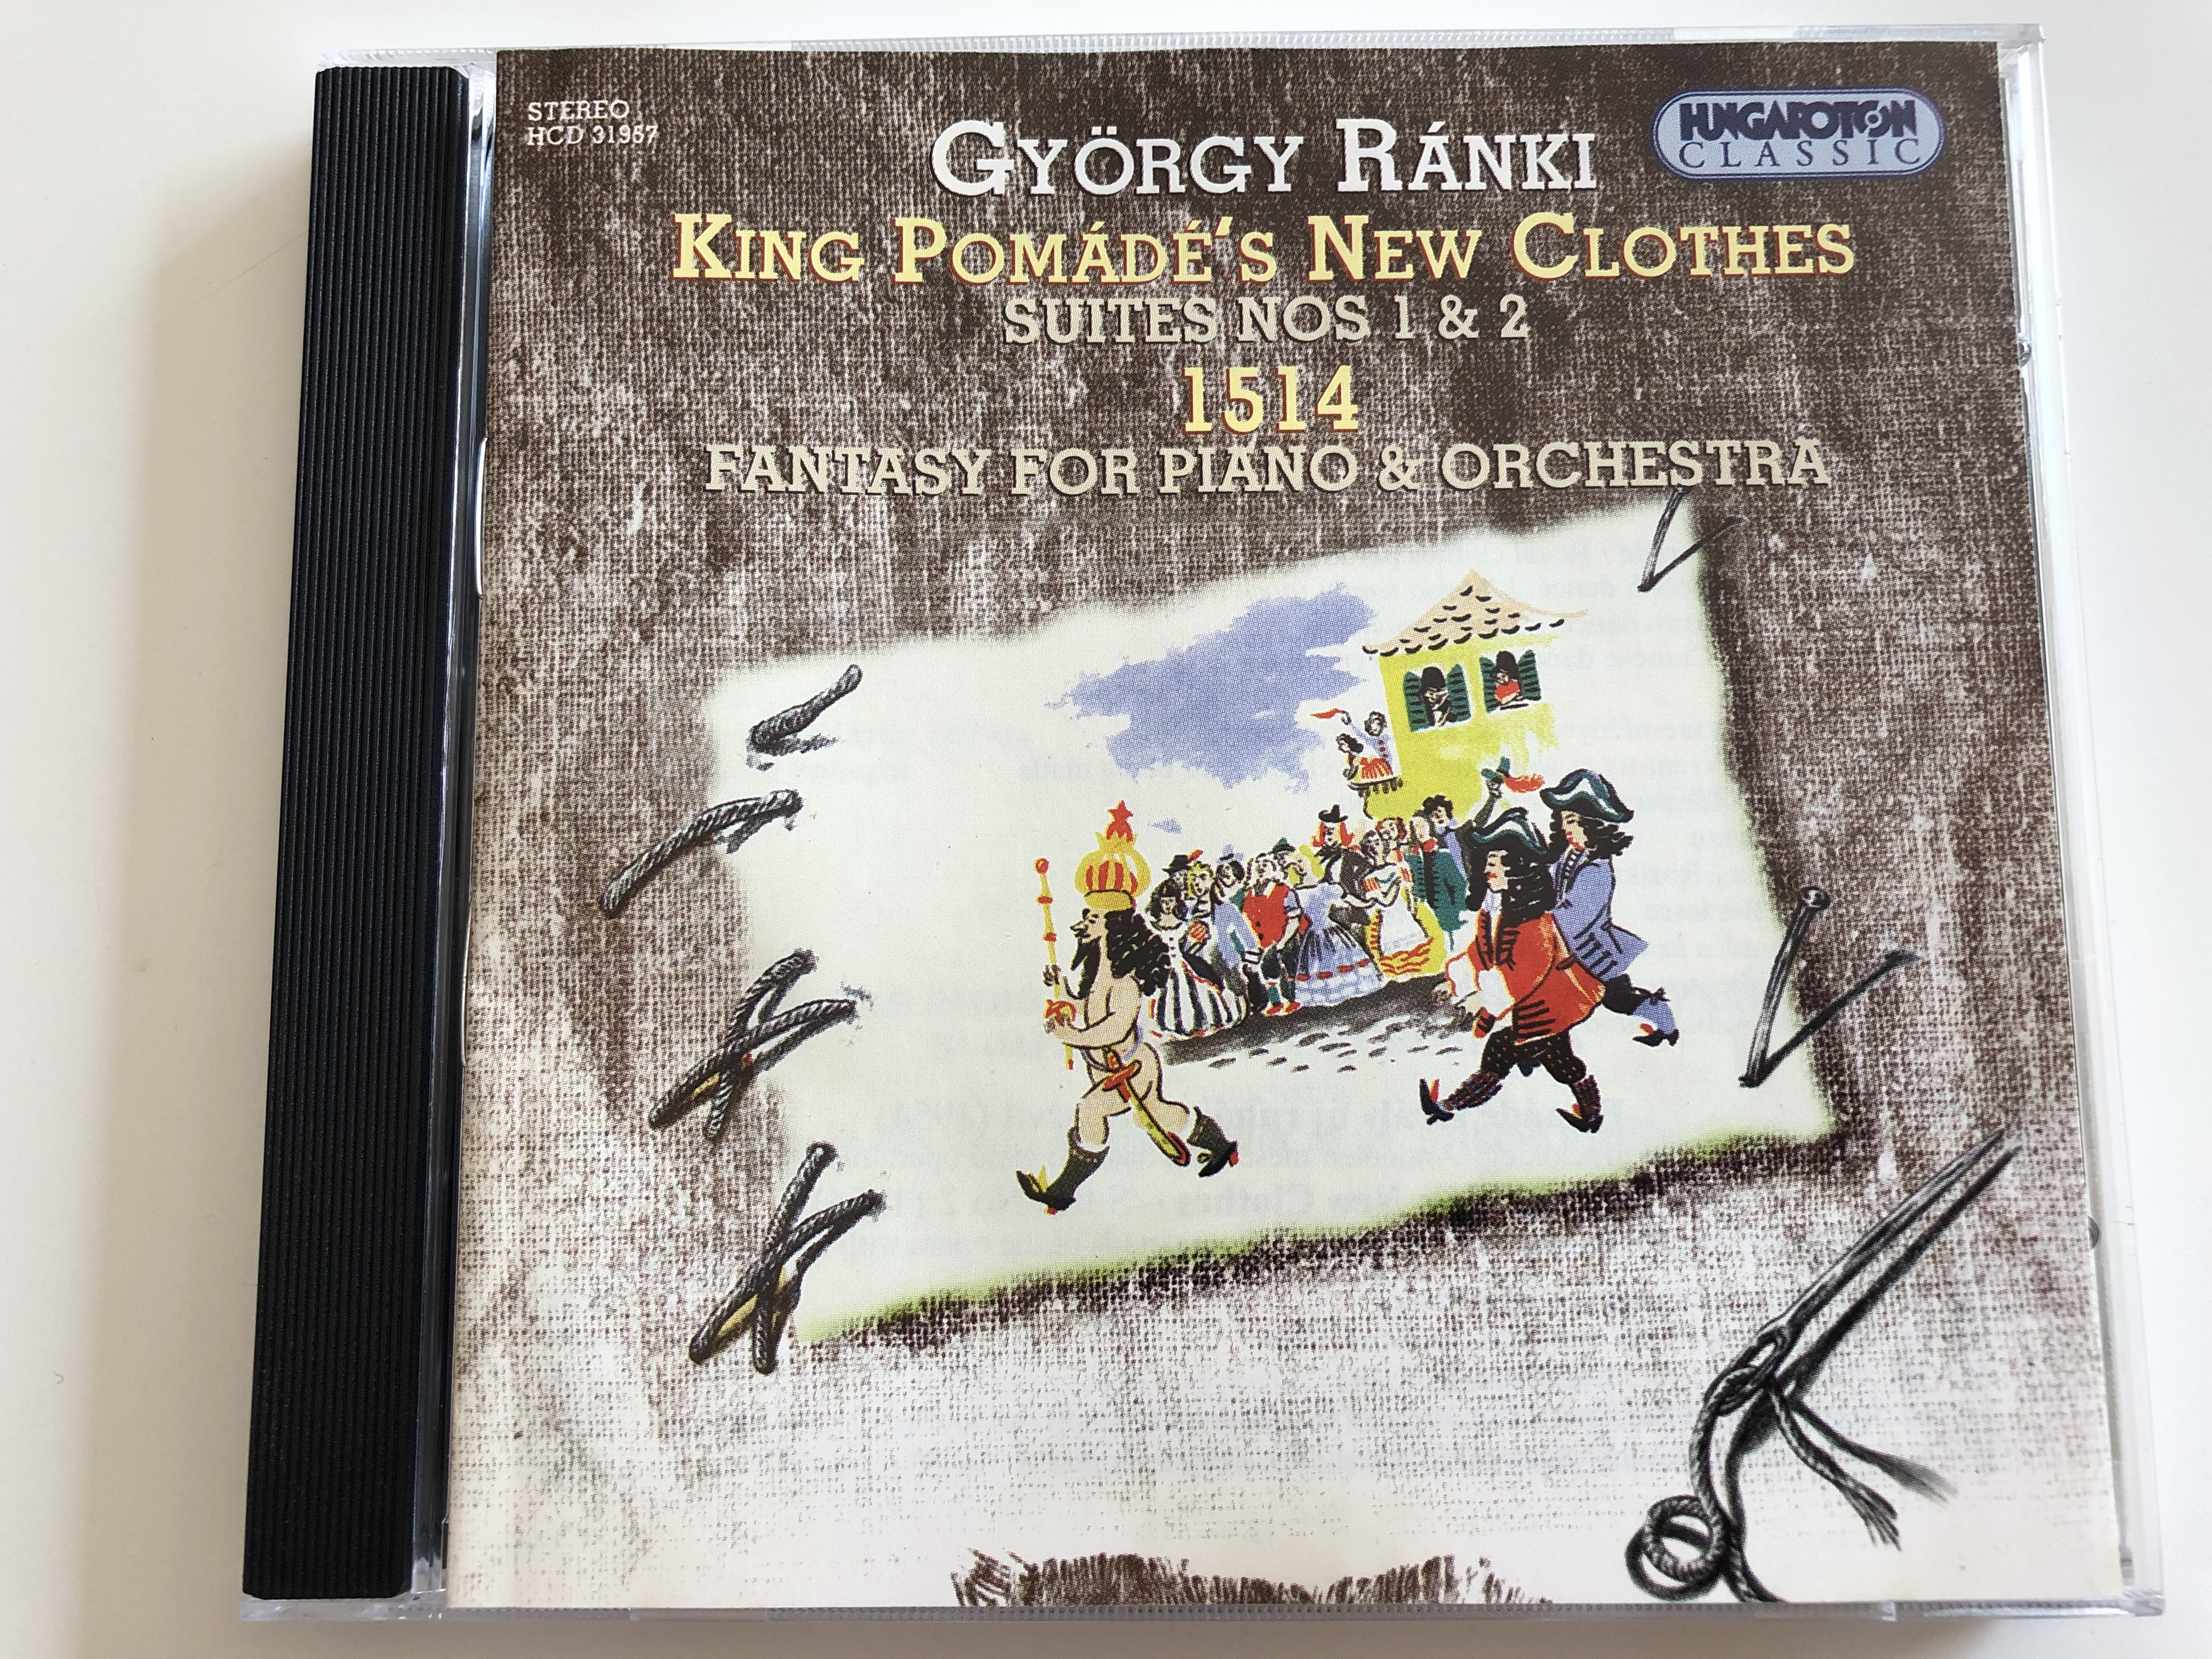 gy-rgy-r-nki-king-pom-d-s-new-clothes-suites-nos-1-2-1514-fantasy-for-piano-orchestra-hungaroton-classic-audio-cd-2000-hcd-31957-1-.jpg